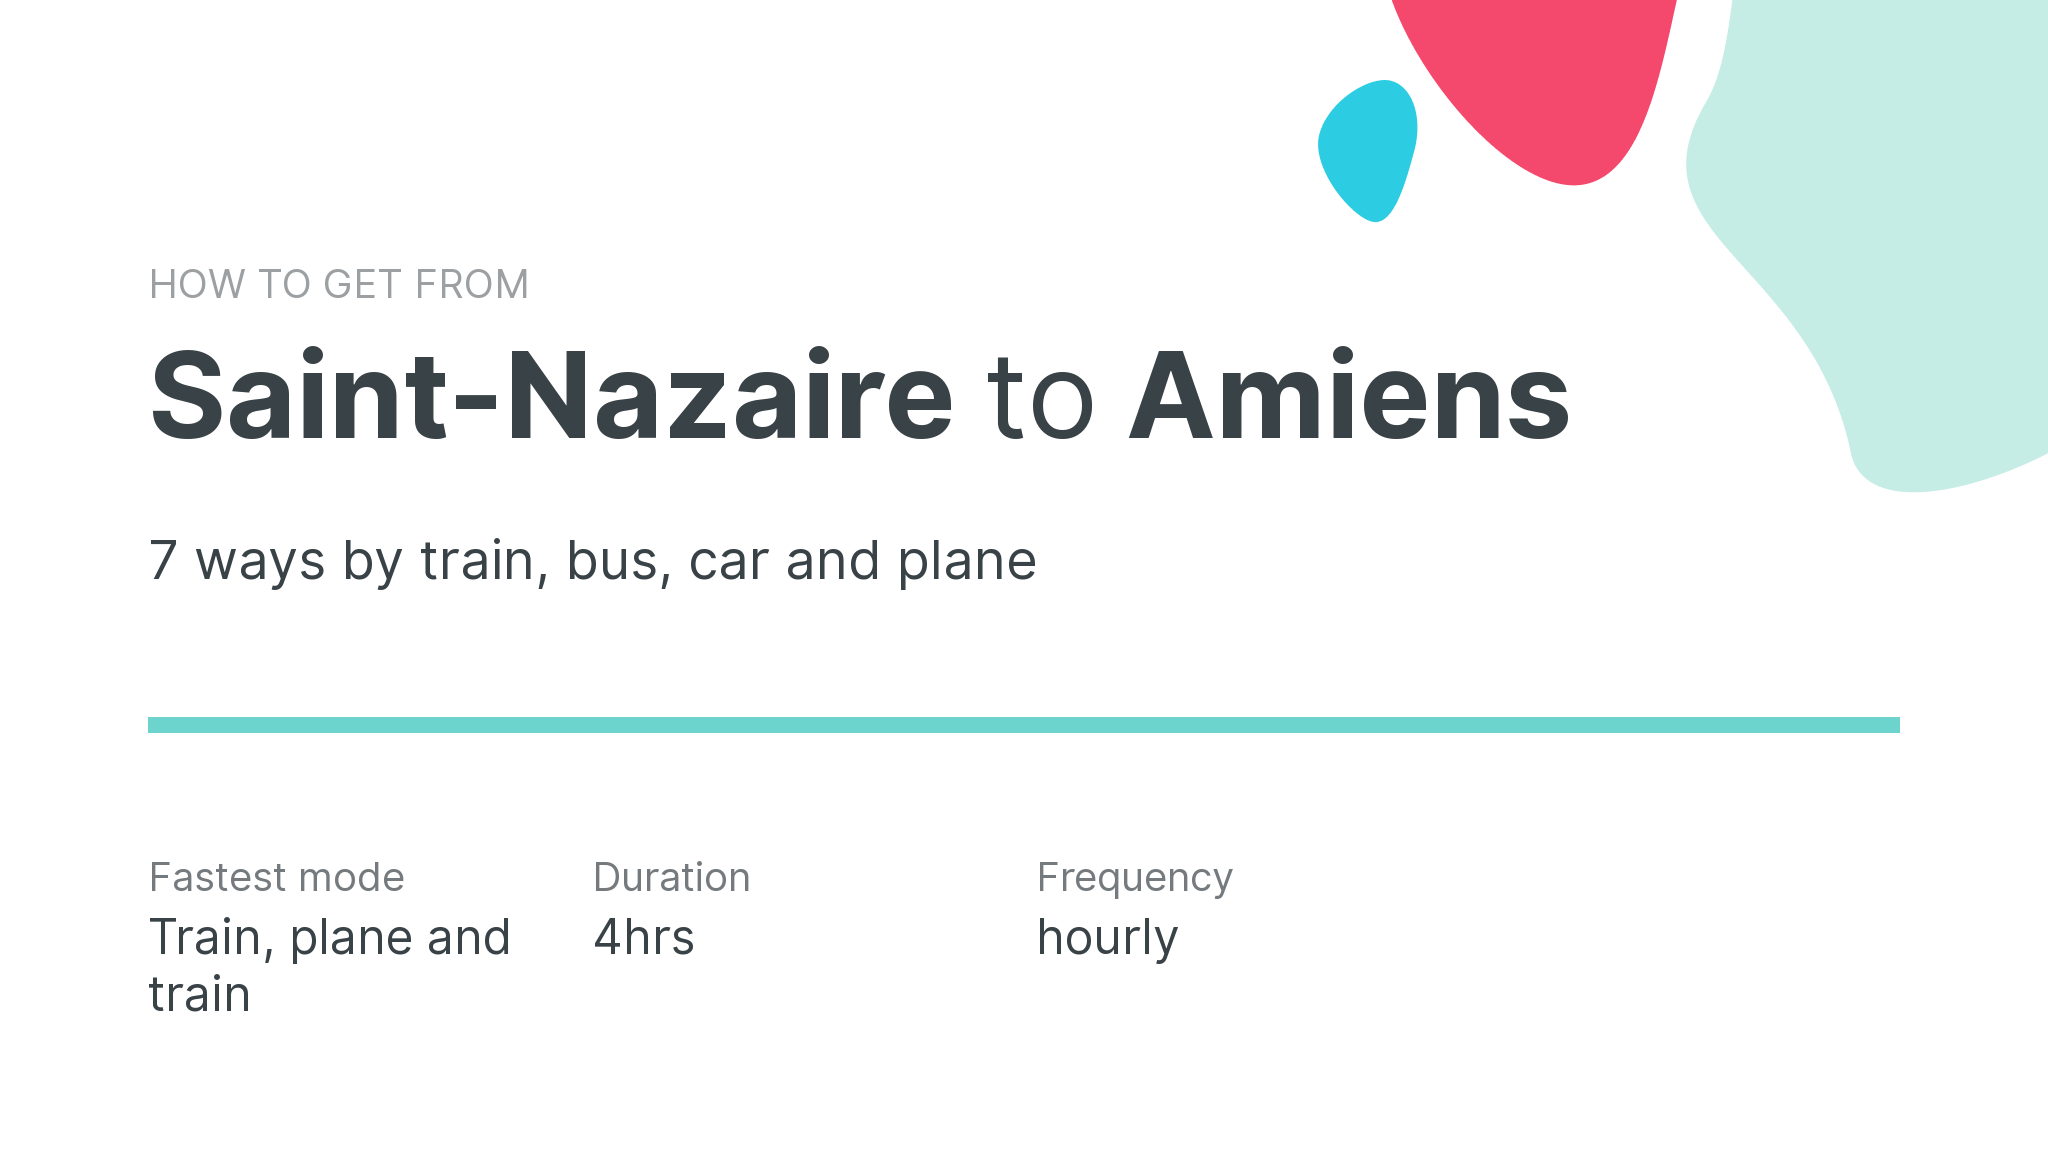 How do I get from Saint-Nazaire to Amiens